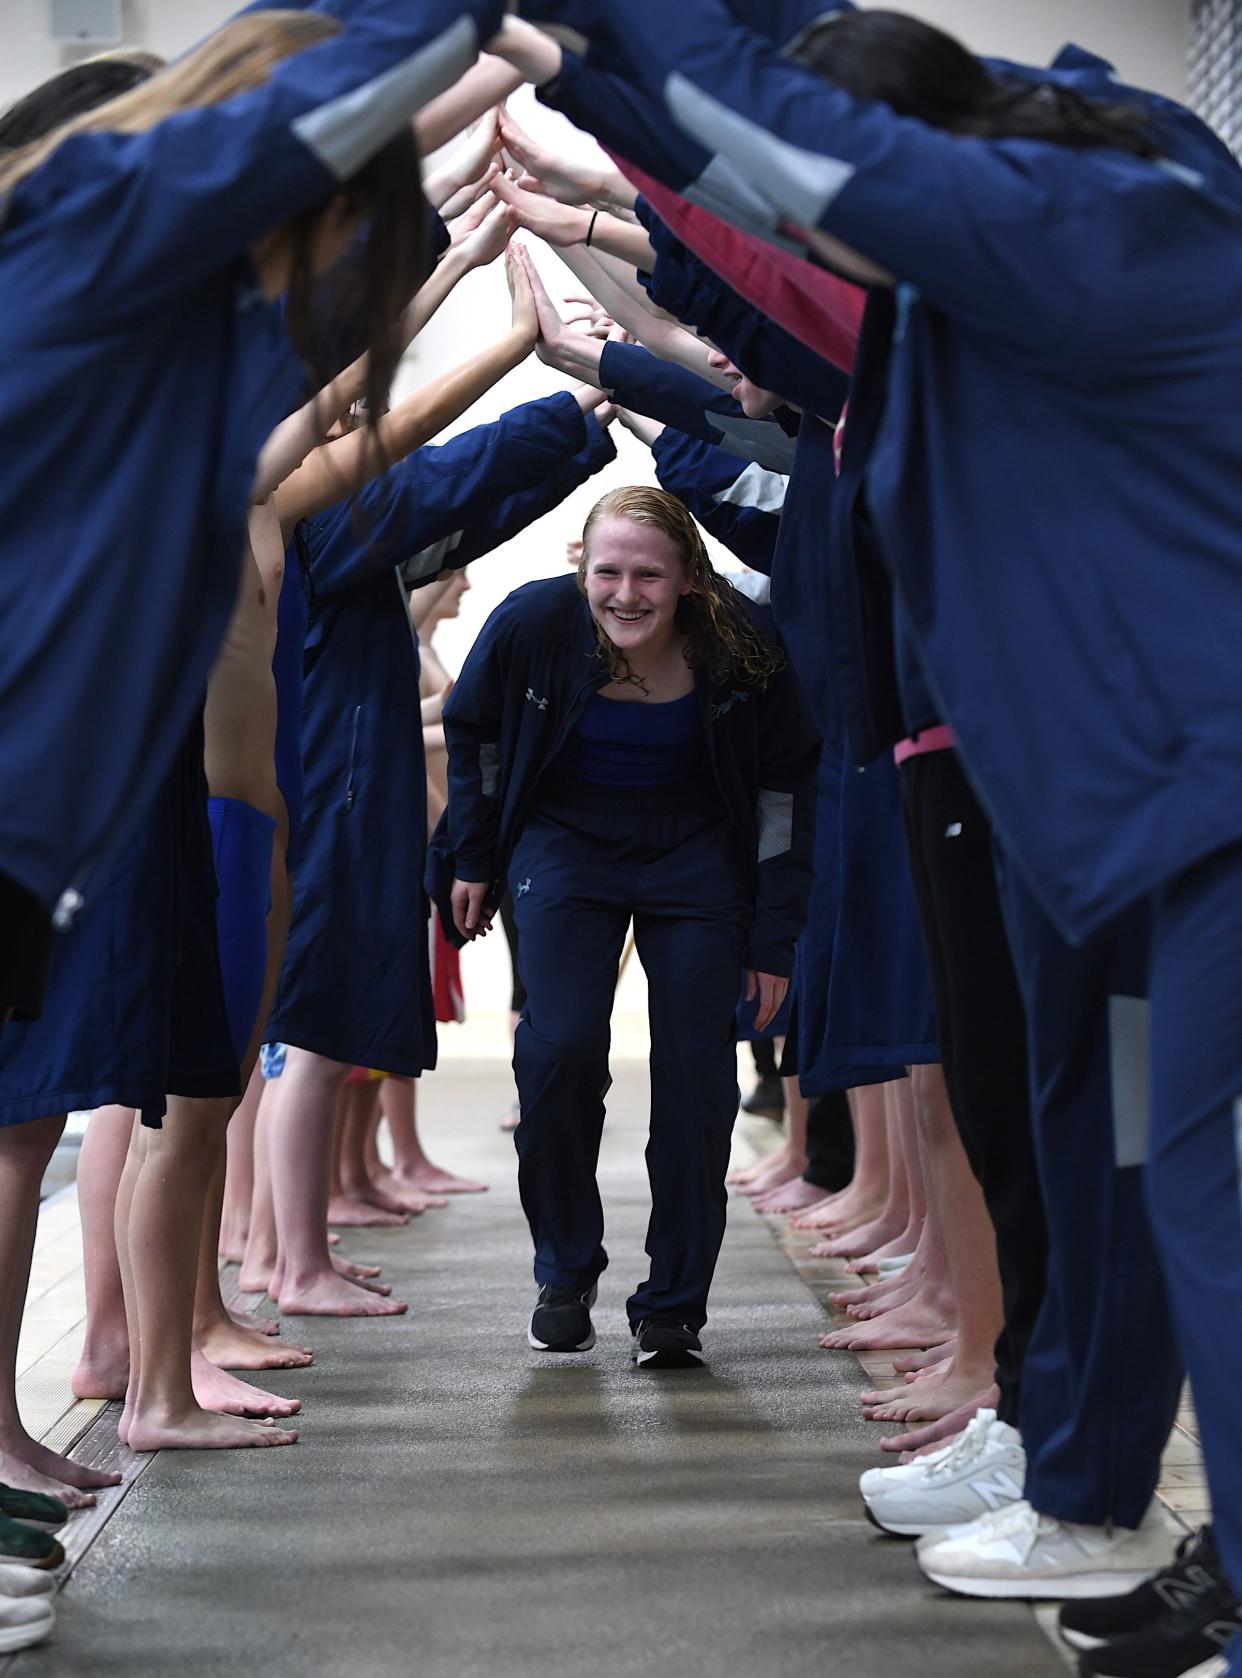 Bartlesville High School senior Tristin Weaver runs through a tunnel made by her teammates during Senior Night at the Phillips 66 Aquatic Center in Bartlesville on Jan. 23, 2024. Other seniors were Griffin Craig, Emma Howze, Cody Lay, Regan Patzkowski and Lily Talbot.